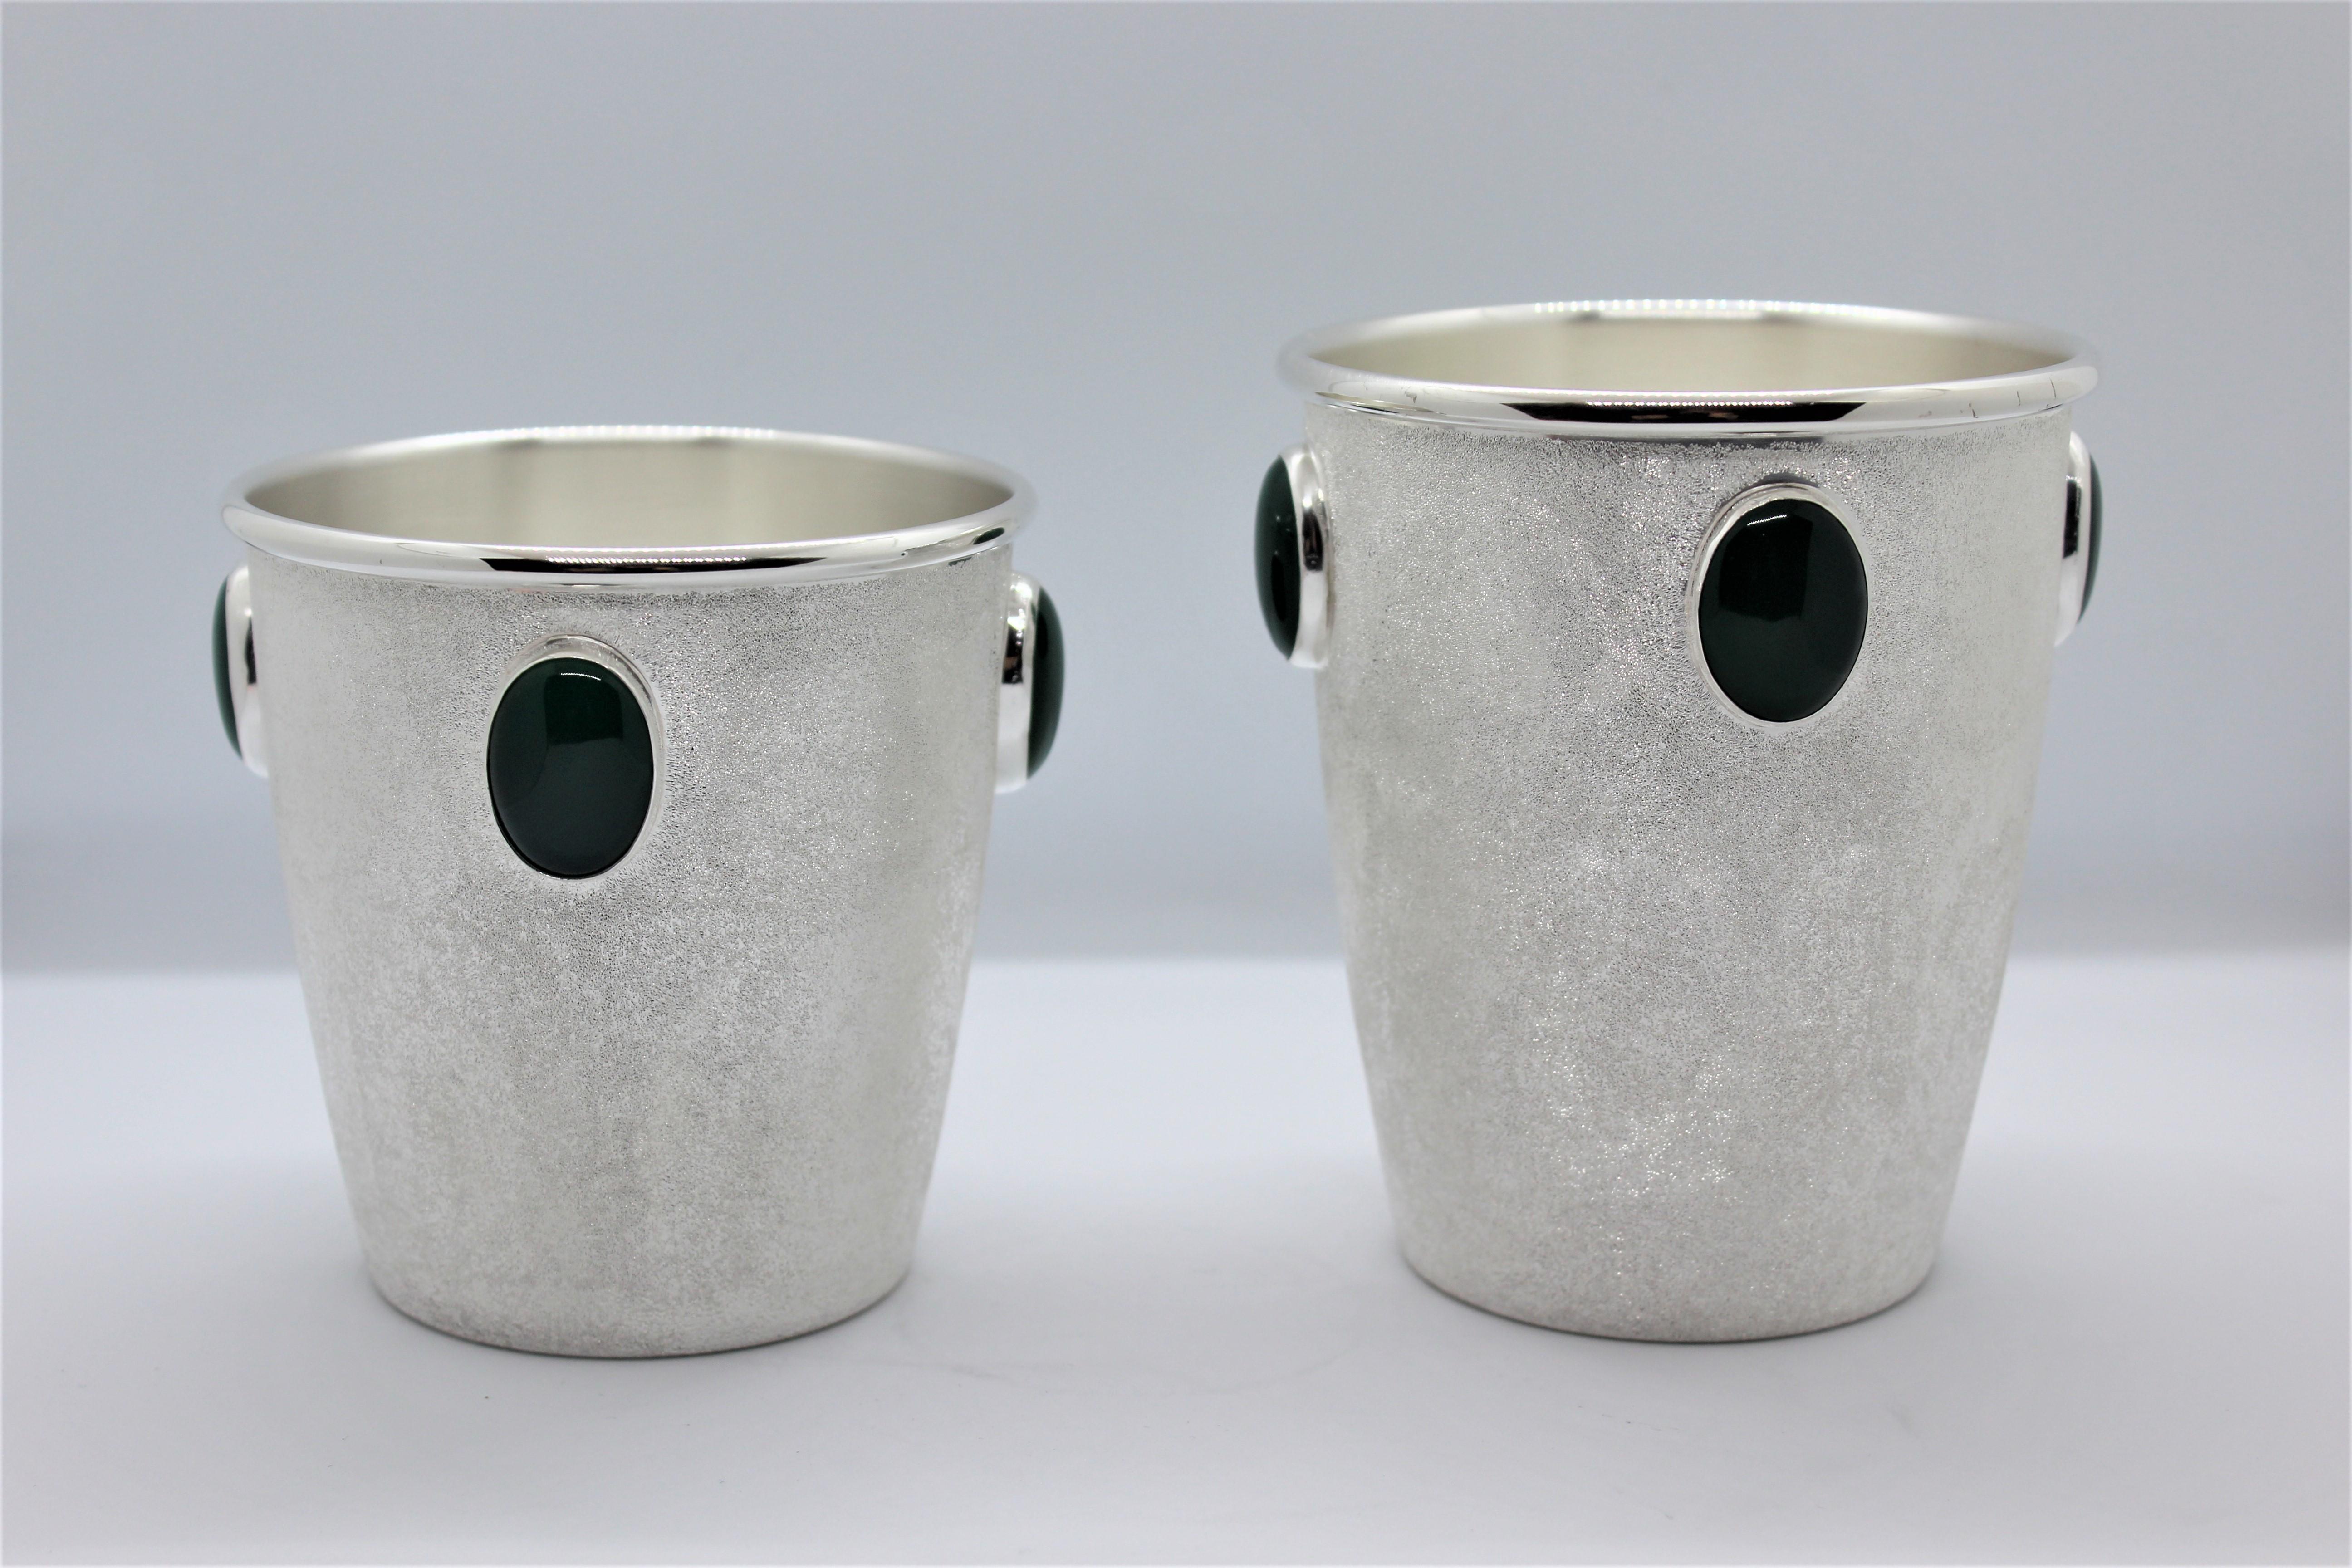 K-over sterling silver glasses with green stones
Our sterling silver tumblers are part of our newest collection. This glass will make your table special every day and even more special on important occasions. The glass was made entirely by hand in